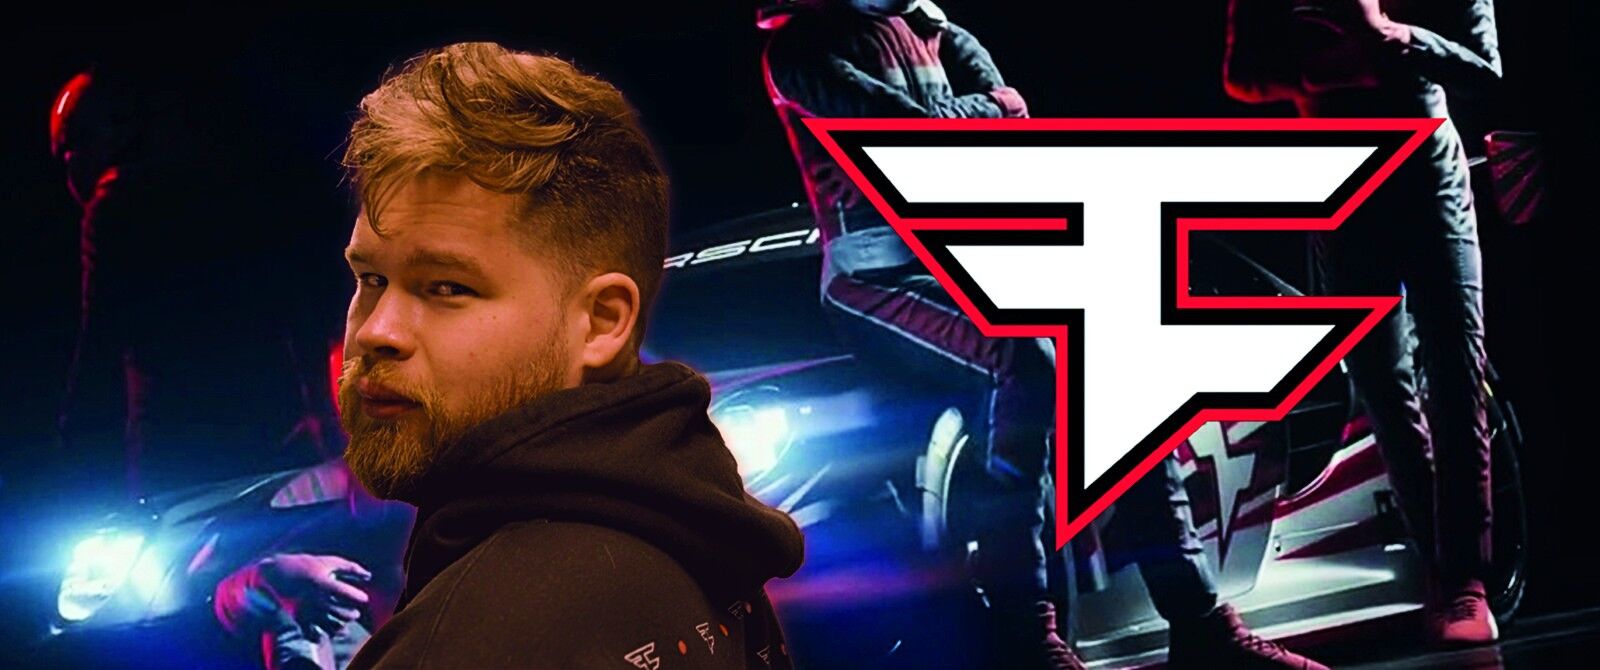 Ian 'CrimSix' Porter on the left shaded in red with the FaZe logo on the right and in the background is a Porsche racecar in FaZe colours and drivers in helmets and overalls standings on all sides of it.